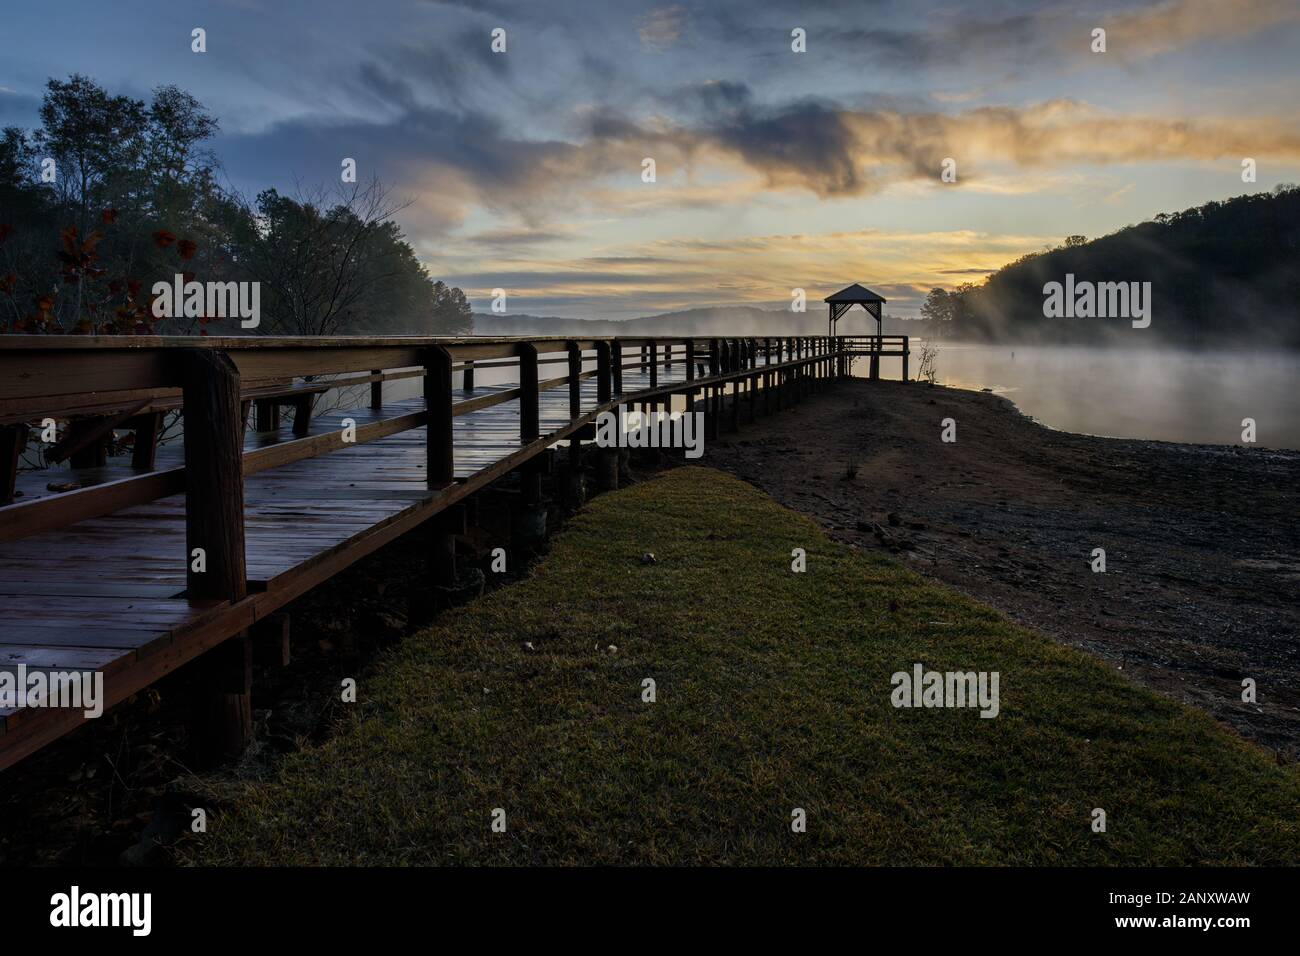 Sunrise, Lake Sidney Lanier. Autumn sunrise along the pier at War Hill Park. War Hill Park is a large park on the north end of Lake Lanier in Dawsonvi Stock Photo